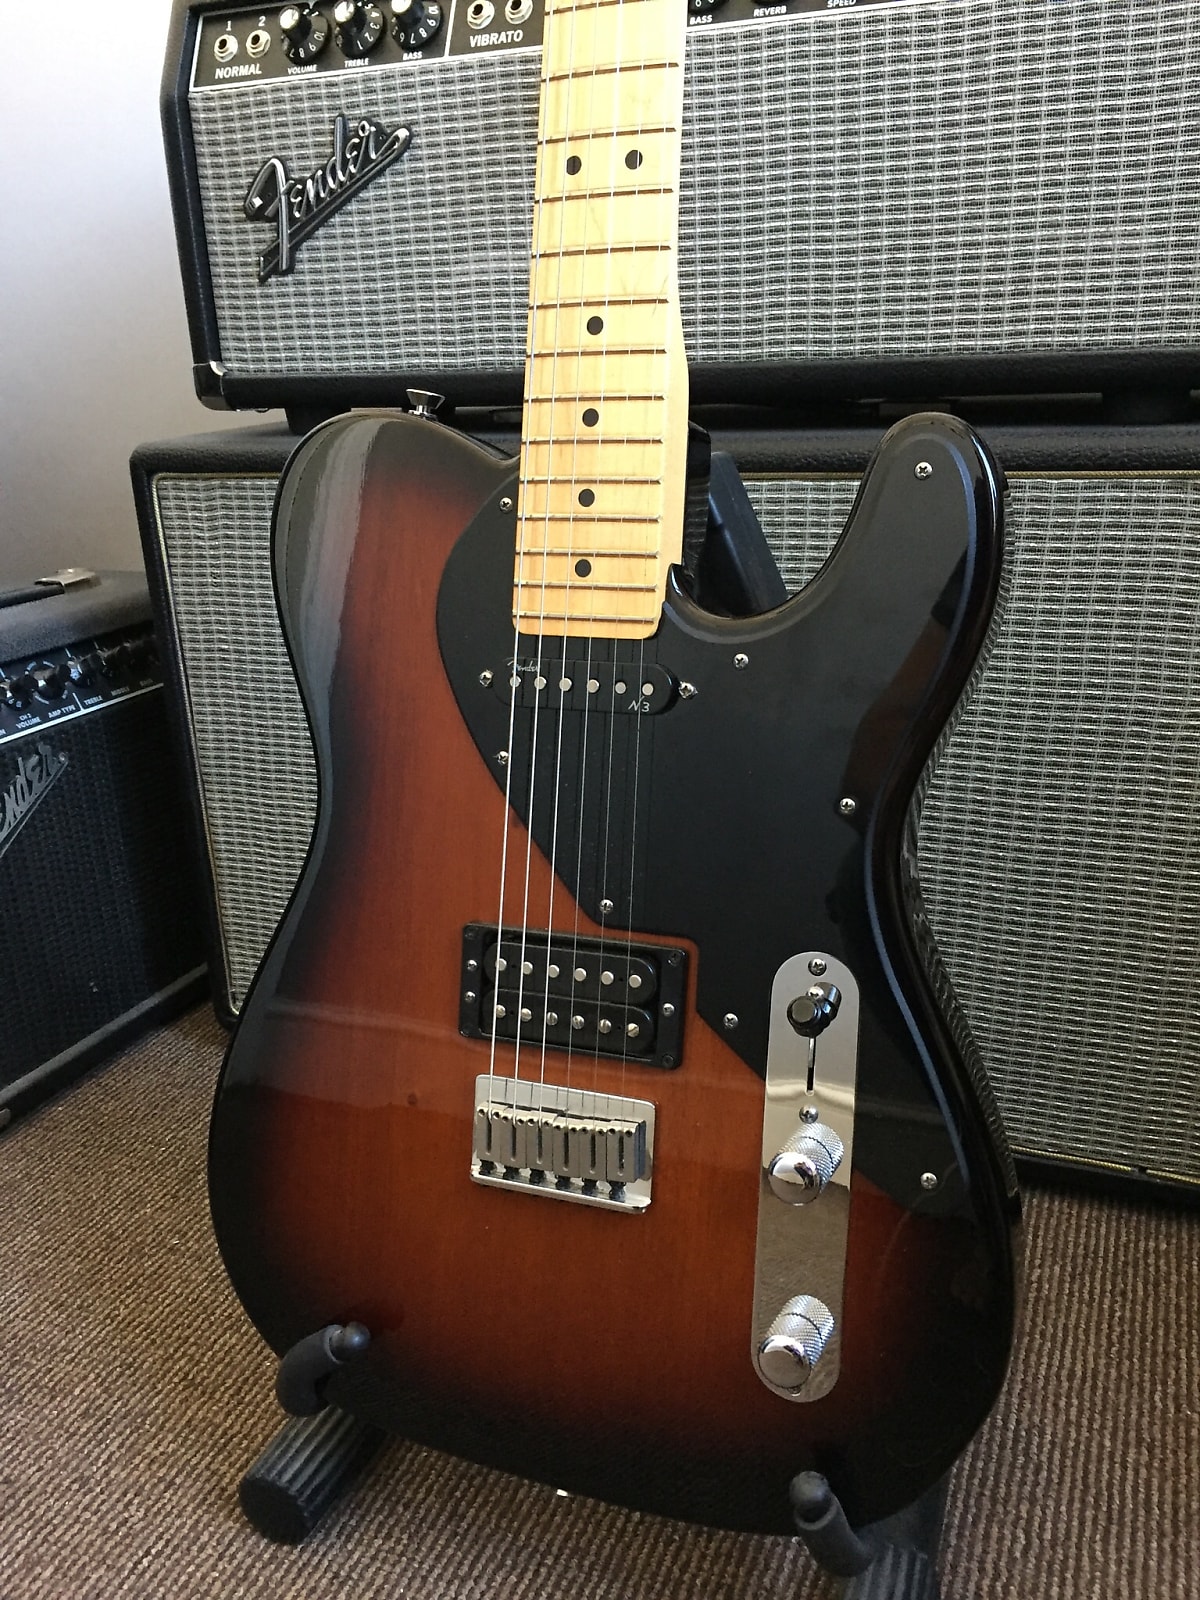 Fender Tele-bration Limited Edition 60th Anniversary | Reverb